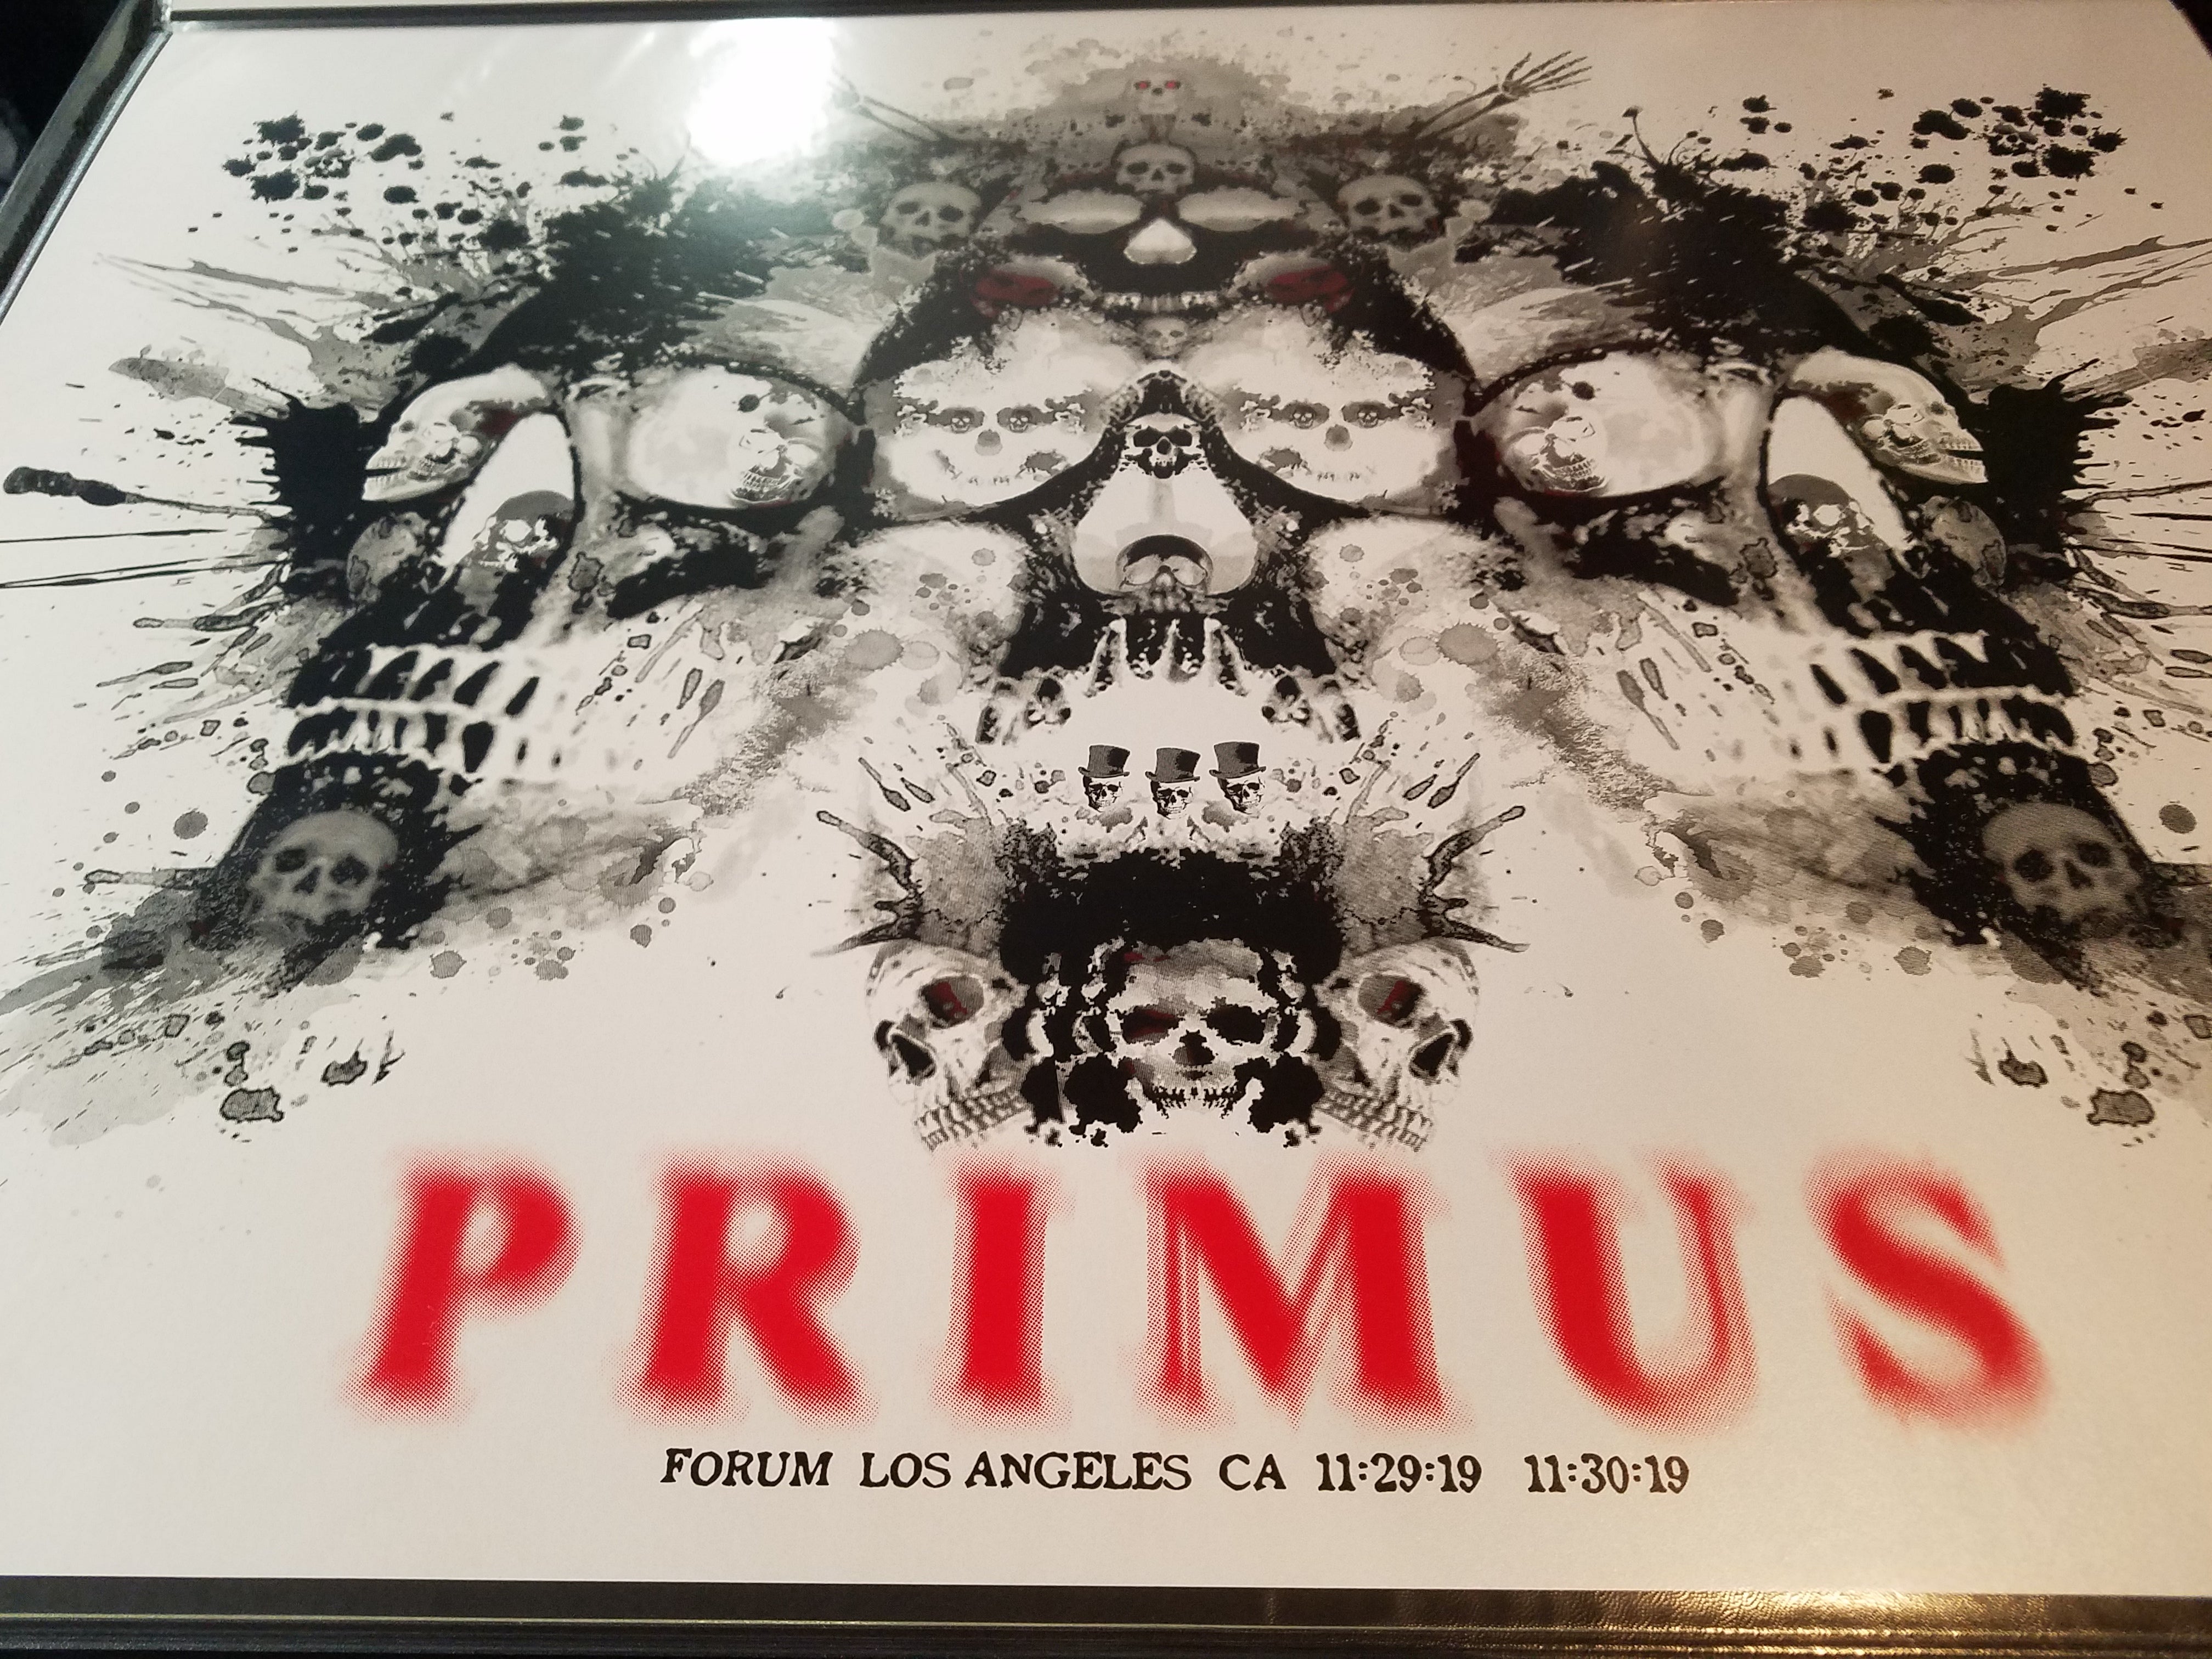 Title:  Primus at the Los Angeles Forum by Emek   Artist:  Emek  Edition:   xx/100  Type:  Screen print  Size:  24" x 18"  Location:   Los Angeles, CA    Venue:  LA Forum, Los Angeles Forum, Fabulous Forum, The  Notes:   Signed, numbered, embossed and double doodled by the artist  All prints are stored flat.  Following purchase, all prints are rolled in archival paper and shipped in a sturdy cardboard tube which is bubble wrapped on the inside for each end.